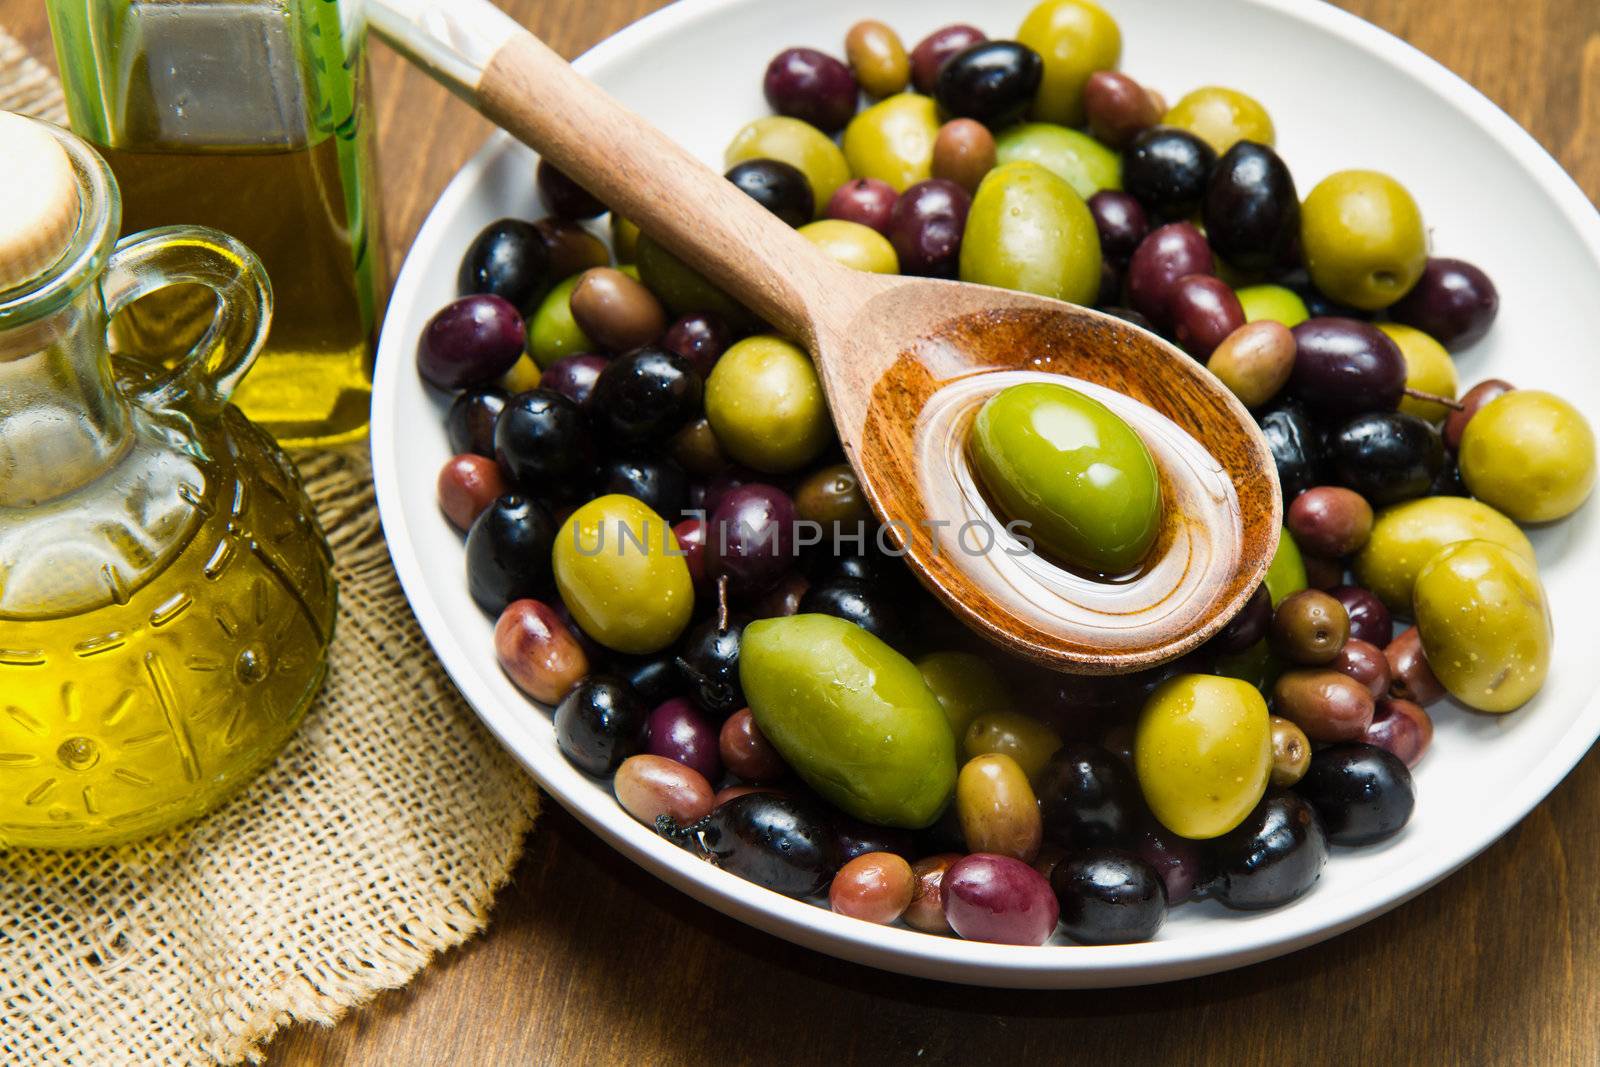 Olives and Olive Oil 